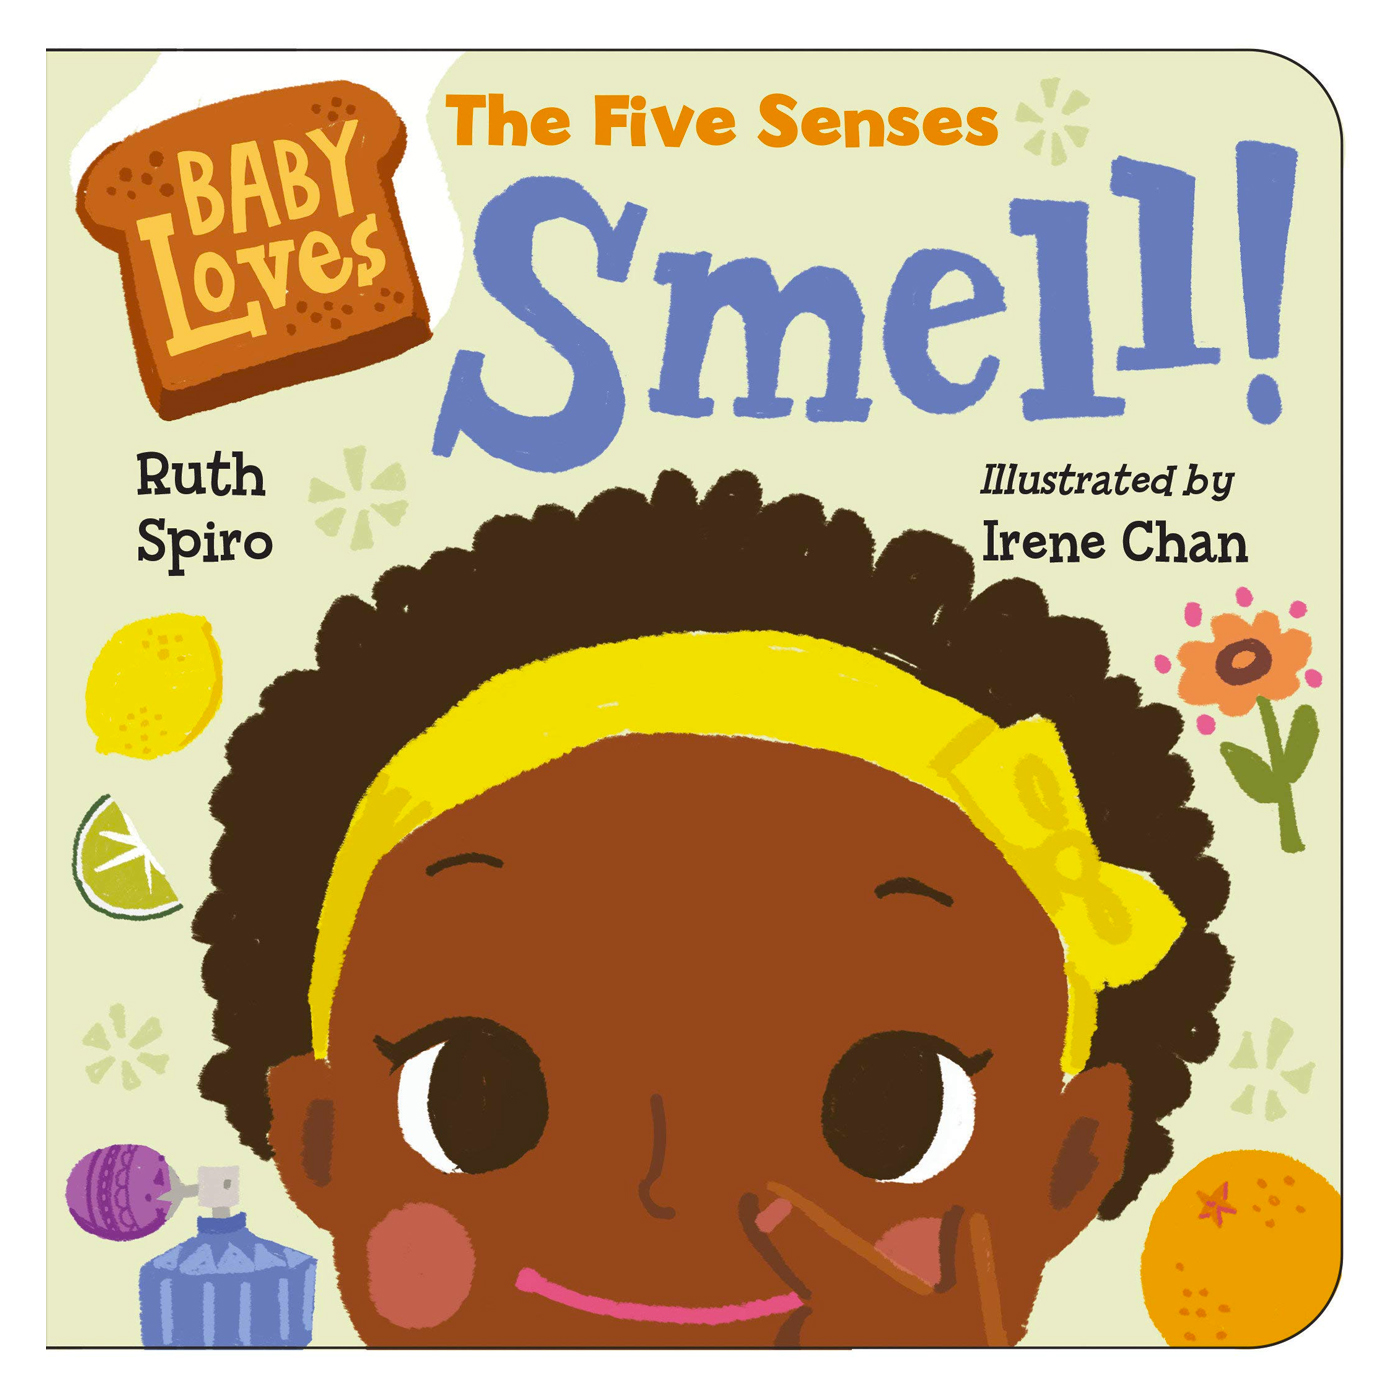  Baby Loves The Five Senses Smell